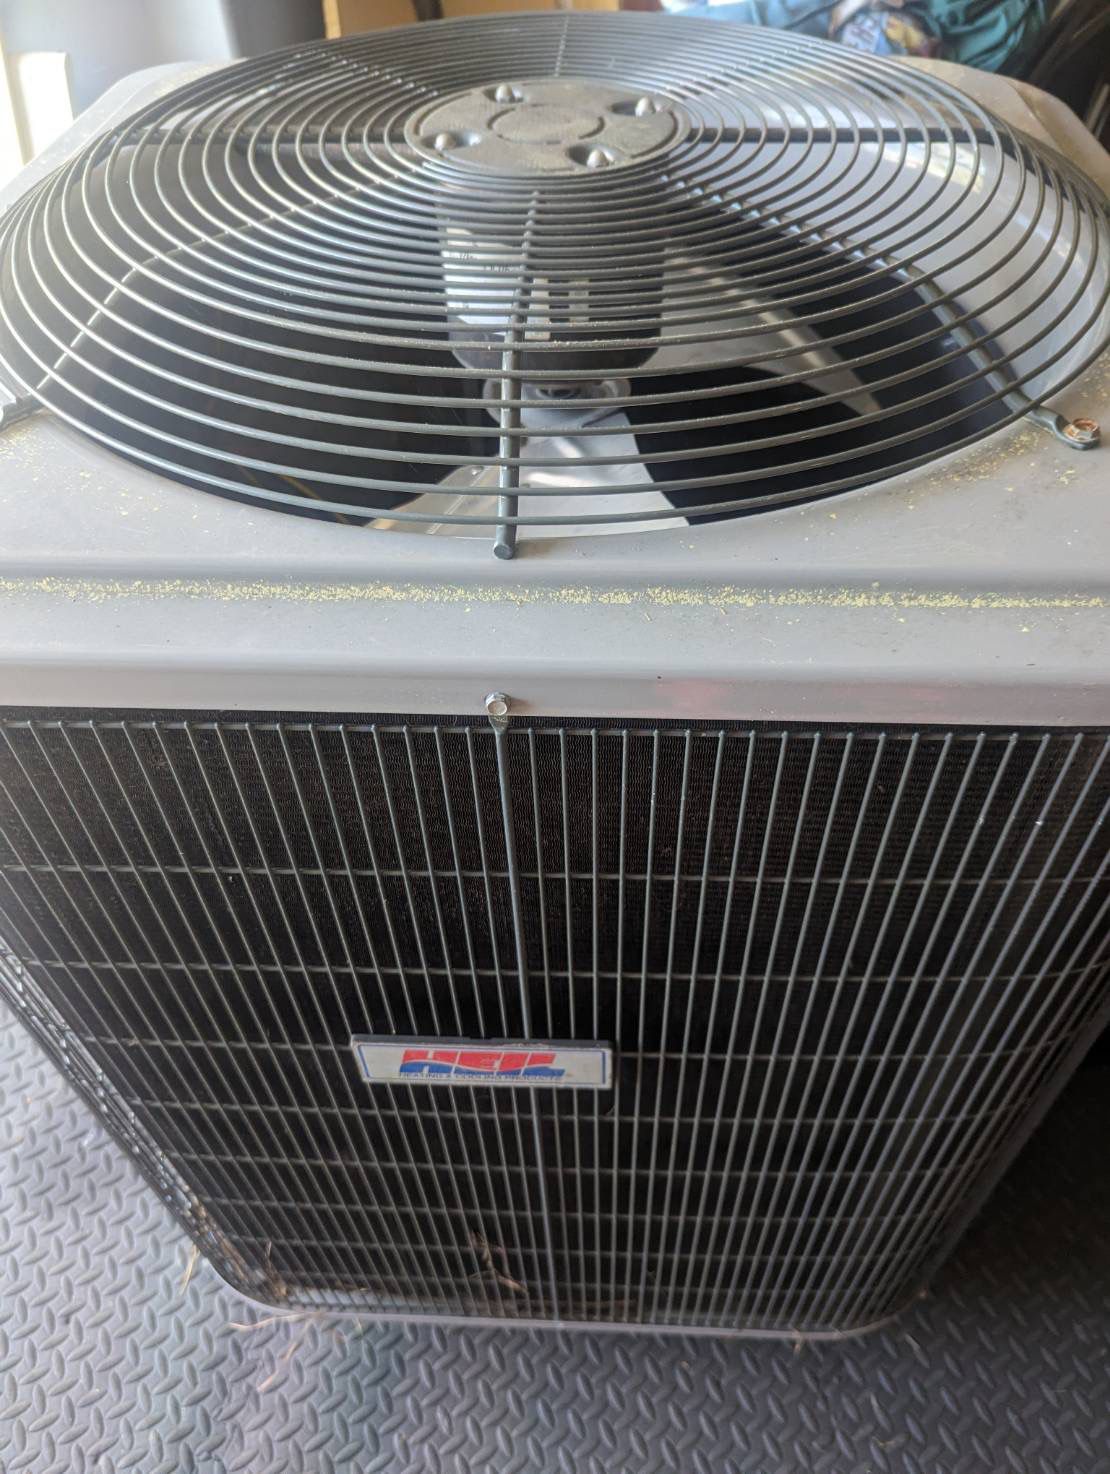 2018 Heil Brand AC Unit Outdoor Lightly Used Works Great